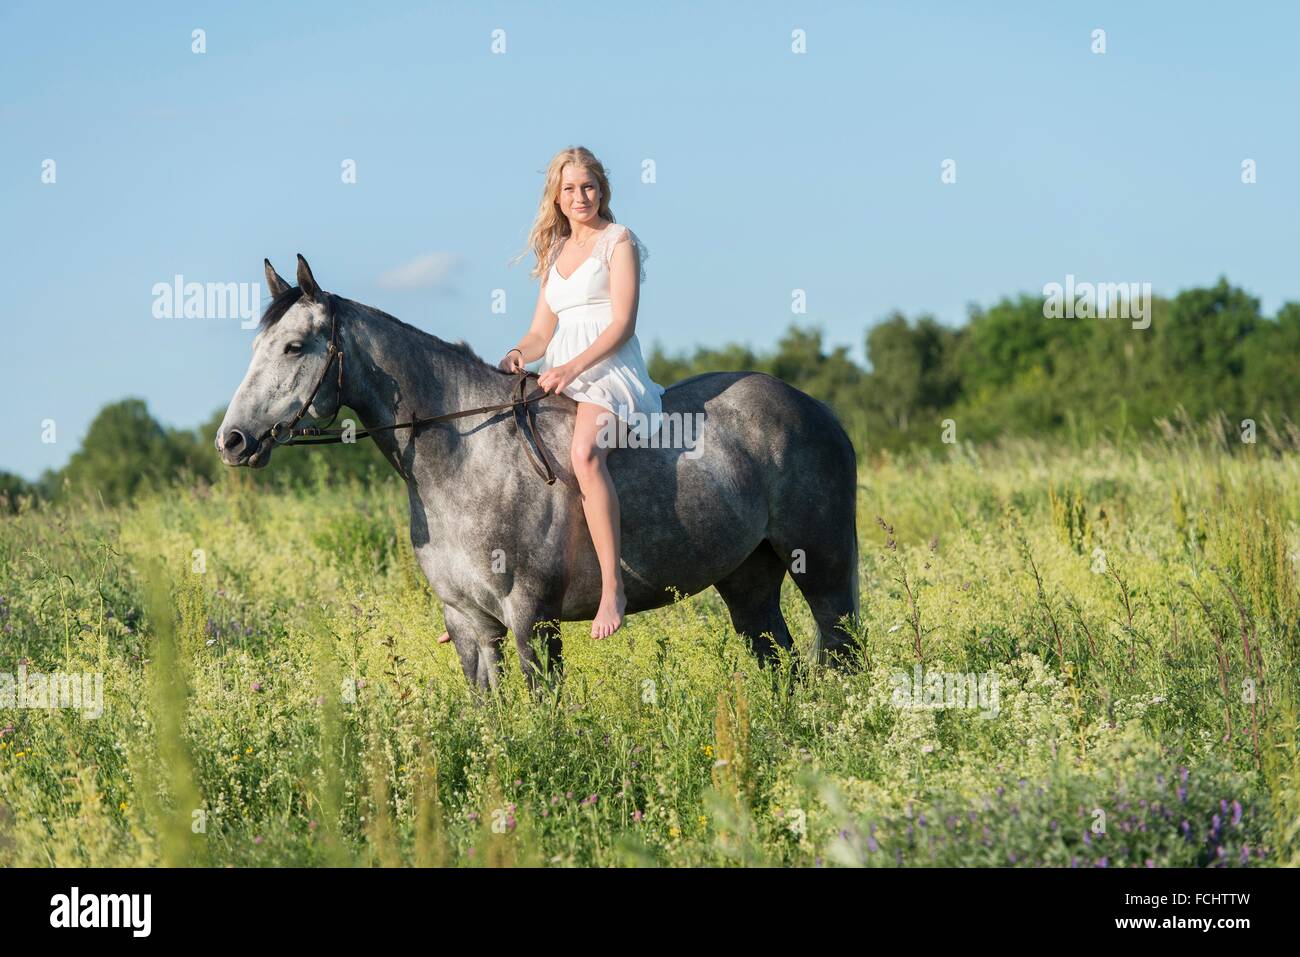 Girl in a white dress riding a grey horse. Stock Photo